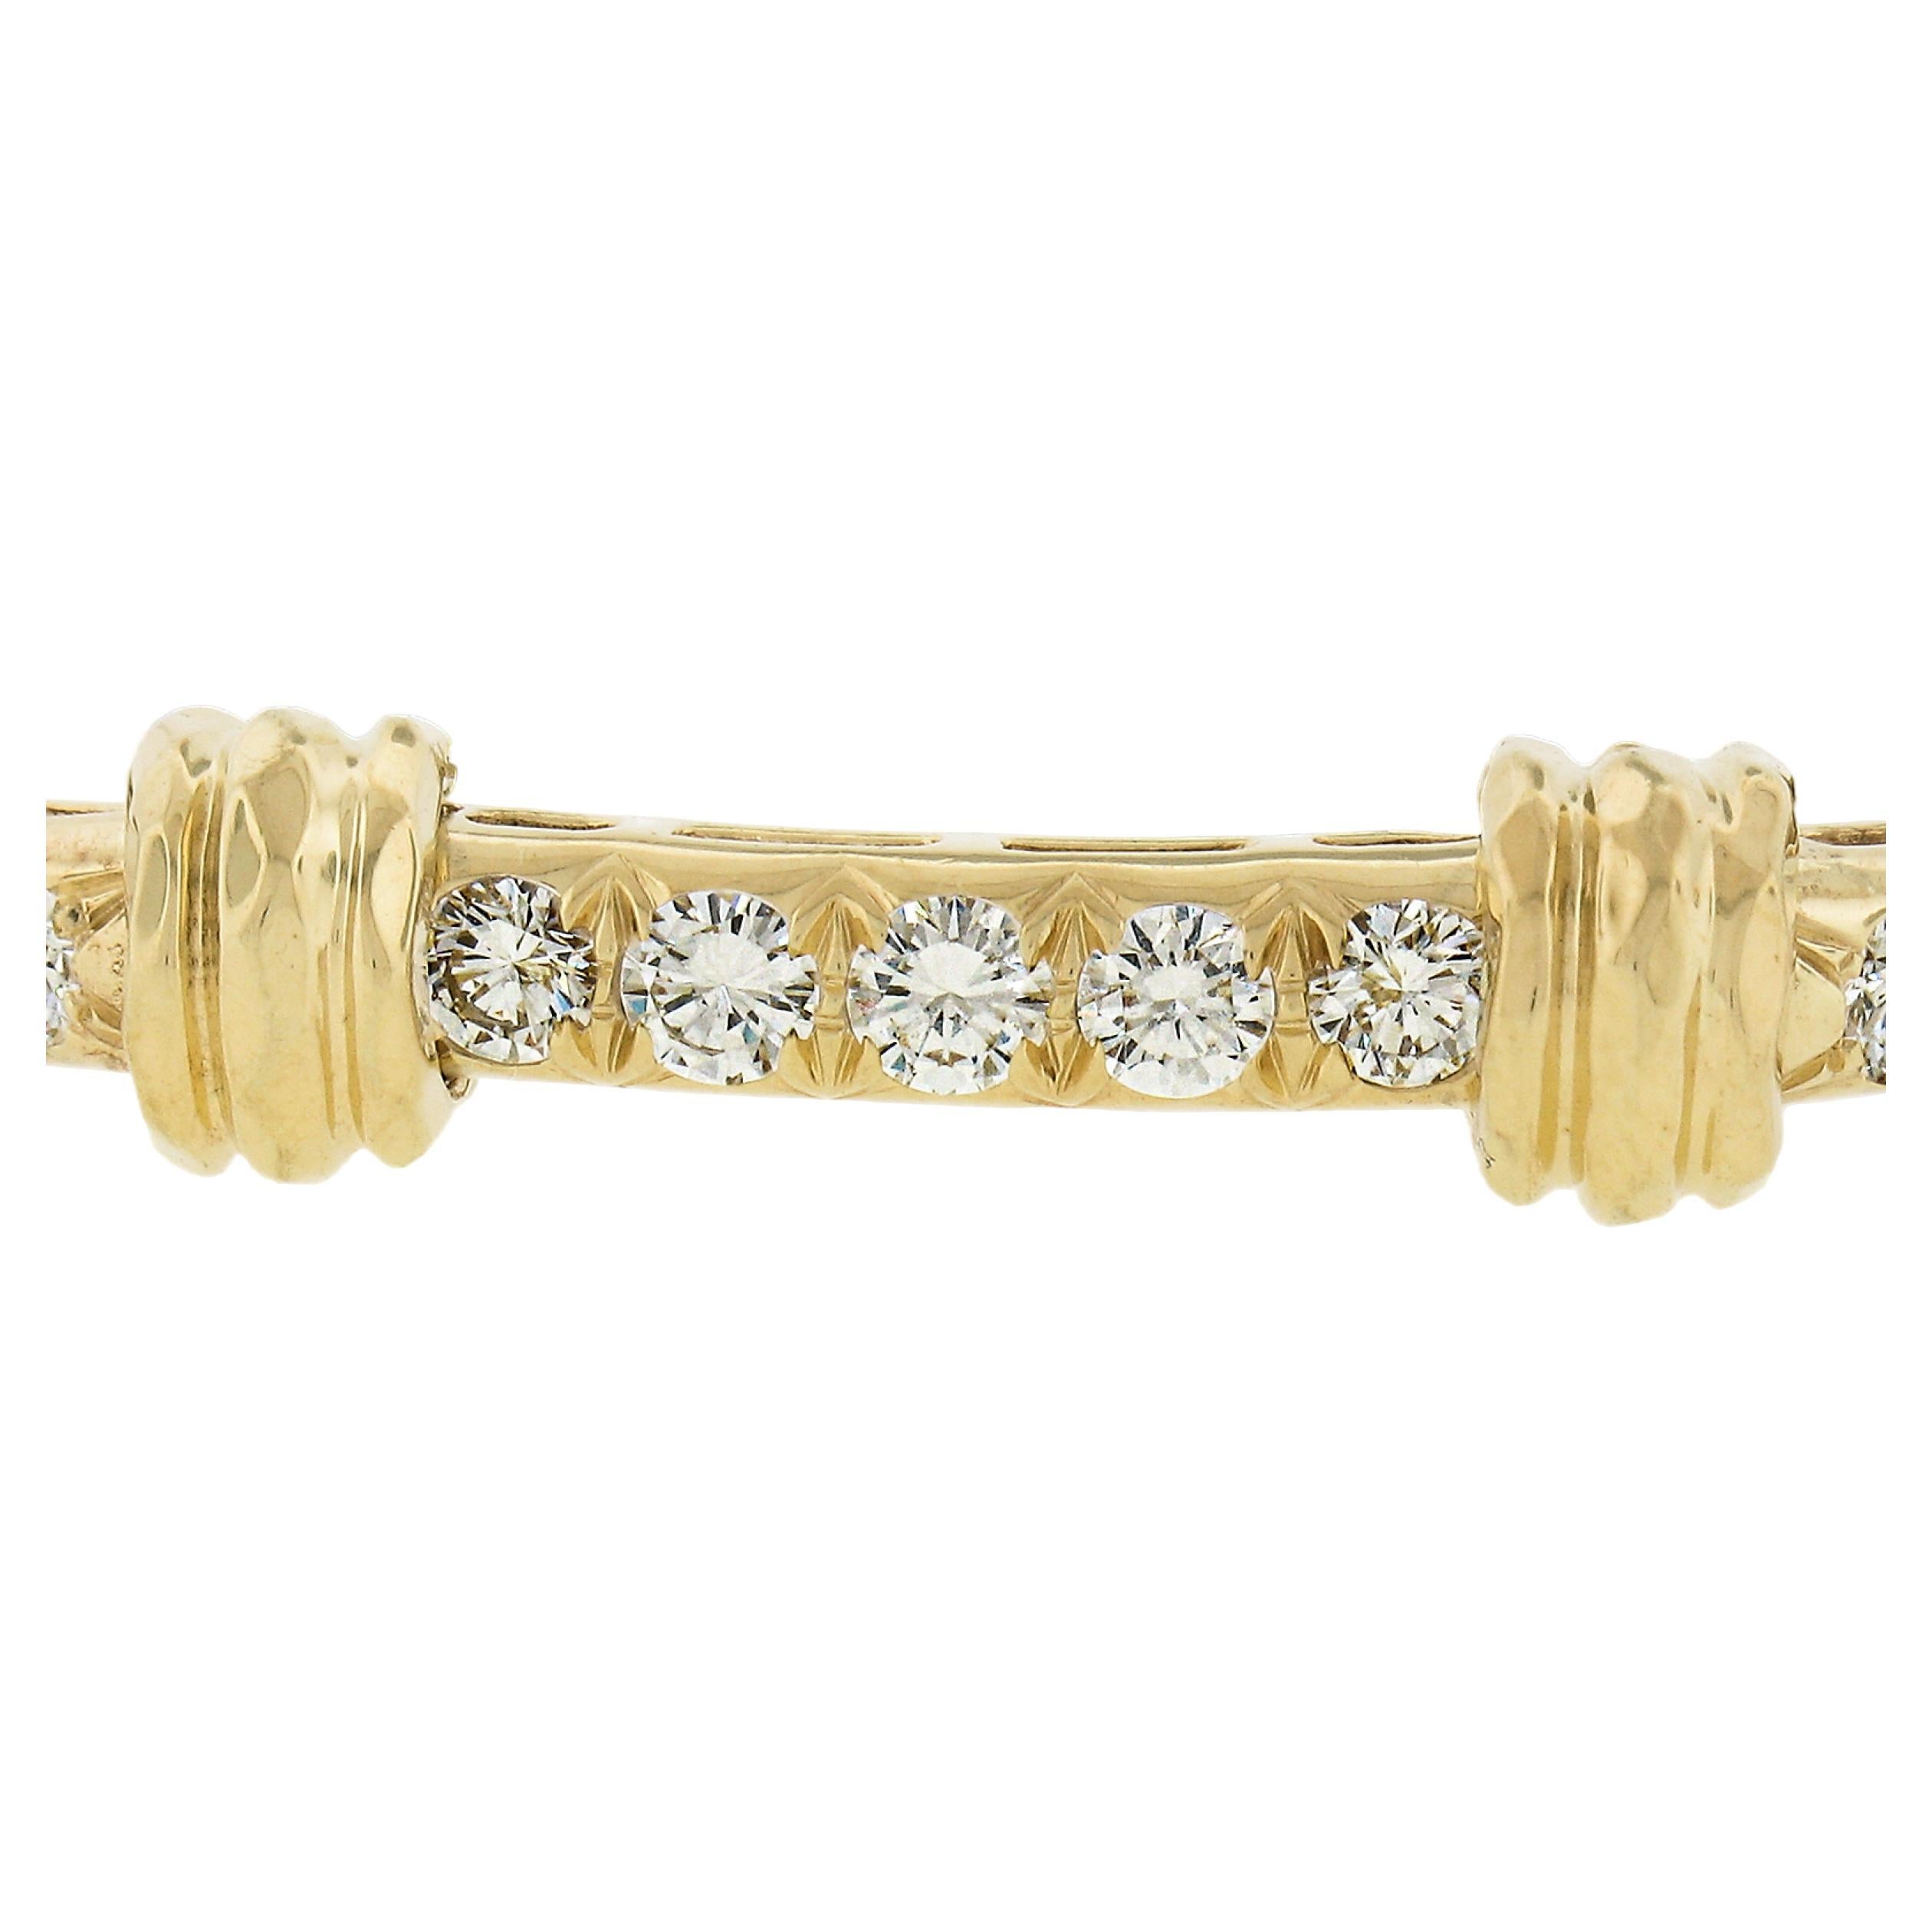 --Stone(s):--
(15) Natural Genuine Diamonds - Round Brilliant Cut - Pave Set - VVS2 Clarity - E/F Color - 2.10ctw (approx.)

Material: Solid 18k Yellow Gold
Weight: 25.45 Grams
Chain Type: Hammered Bar Link w/  Sections
Chain Length:	Comfortably